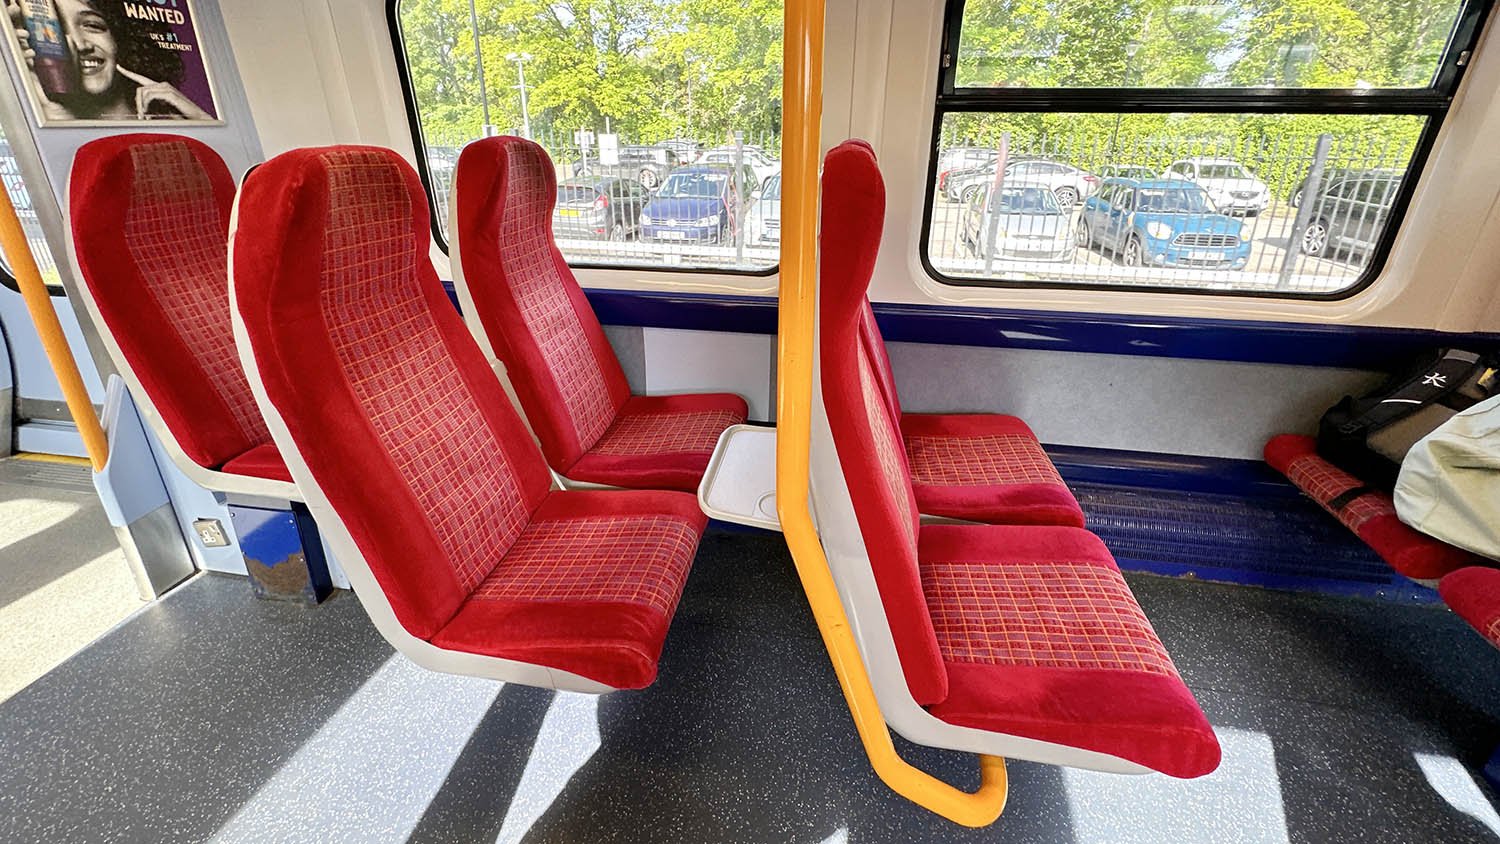 National Rail seat styles vary.